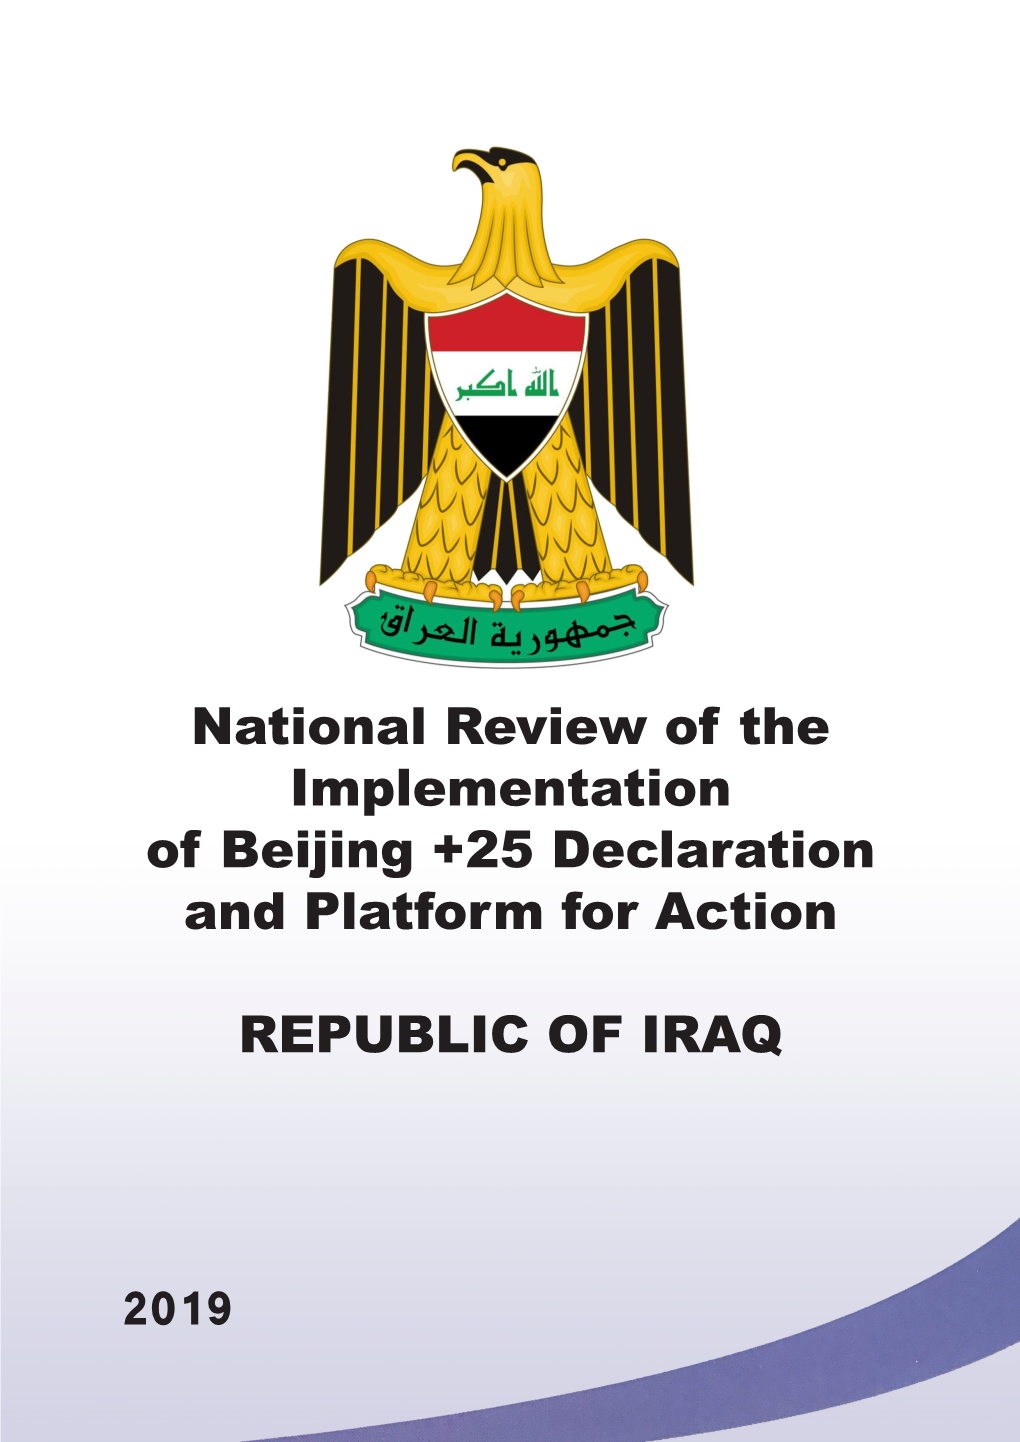 National Review of the Implementation of Beijing +25 Declaration and Platform for Action